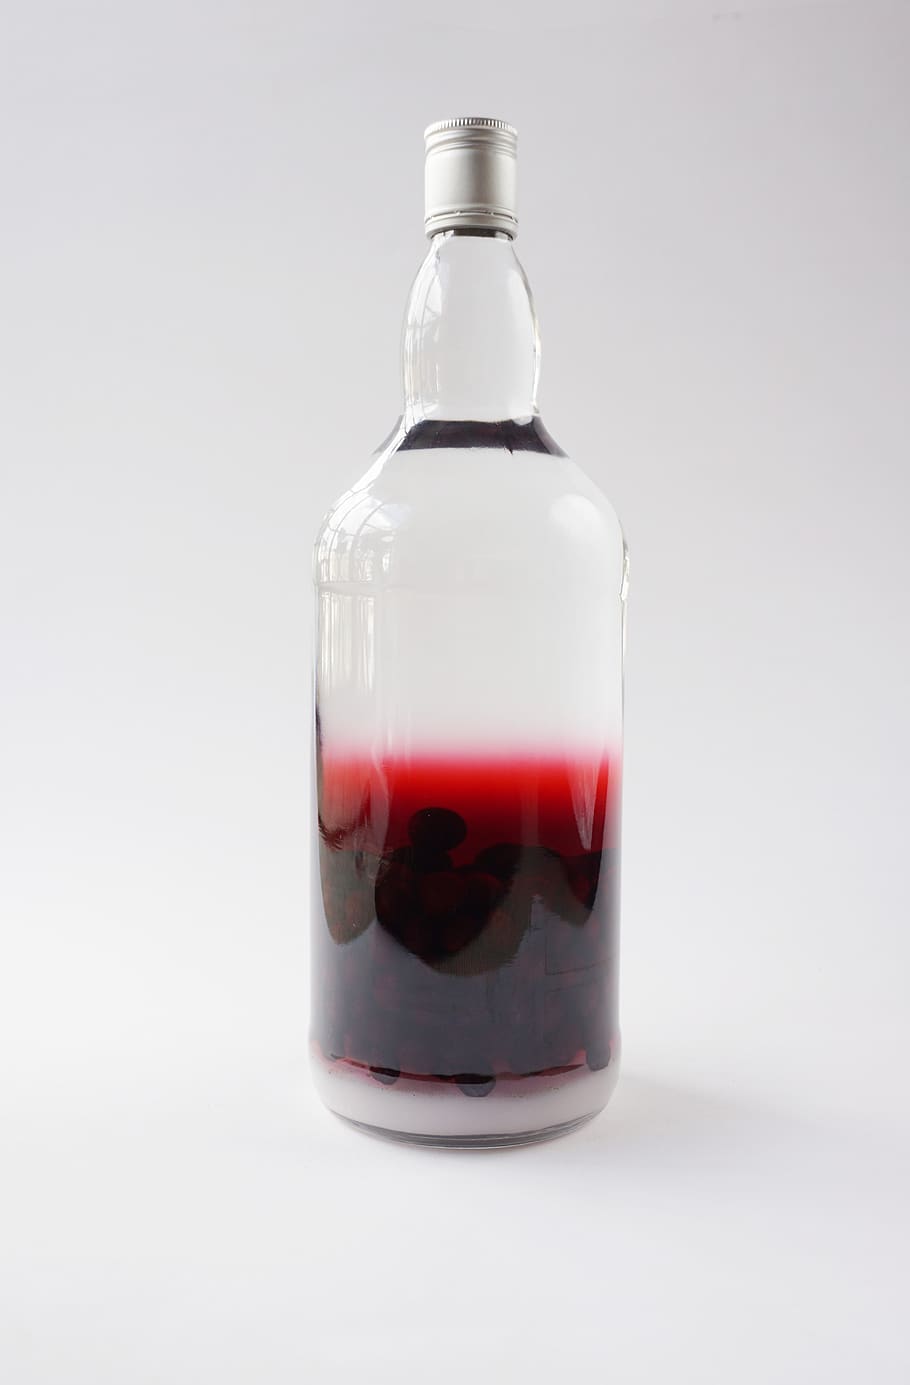 sloe, berry, berries, gin, bottle, clear, infuse, alcohol, white, red